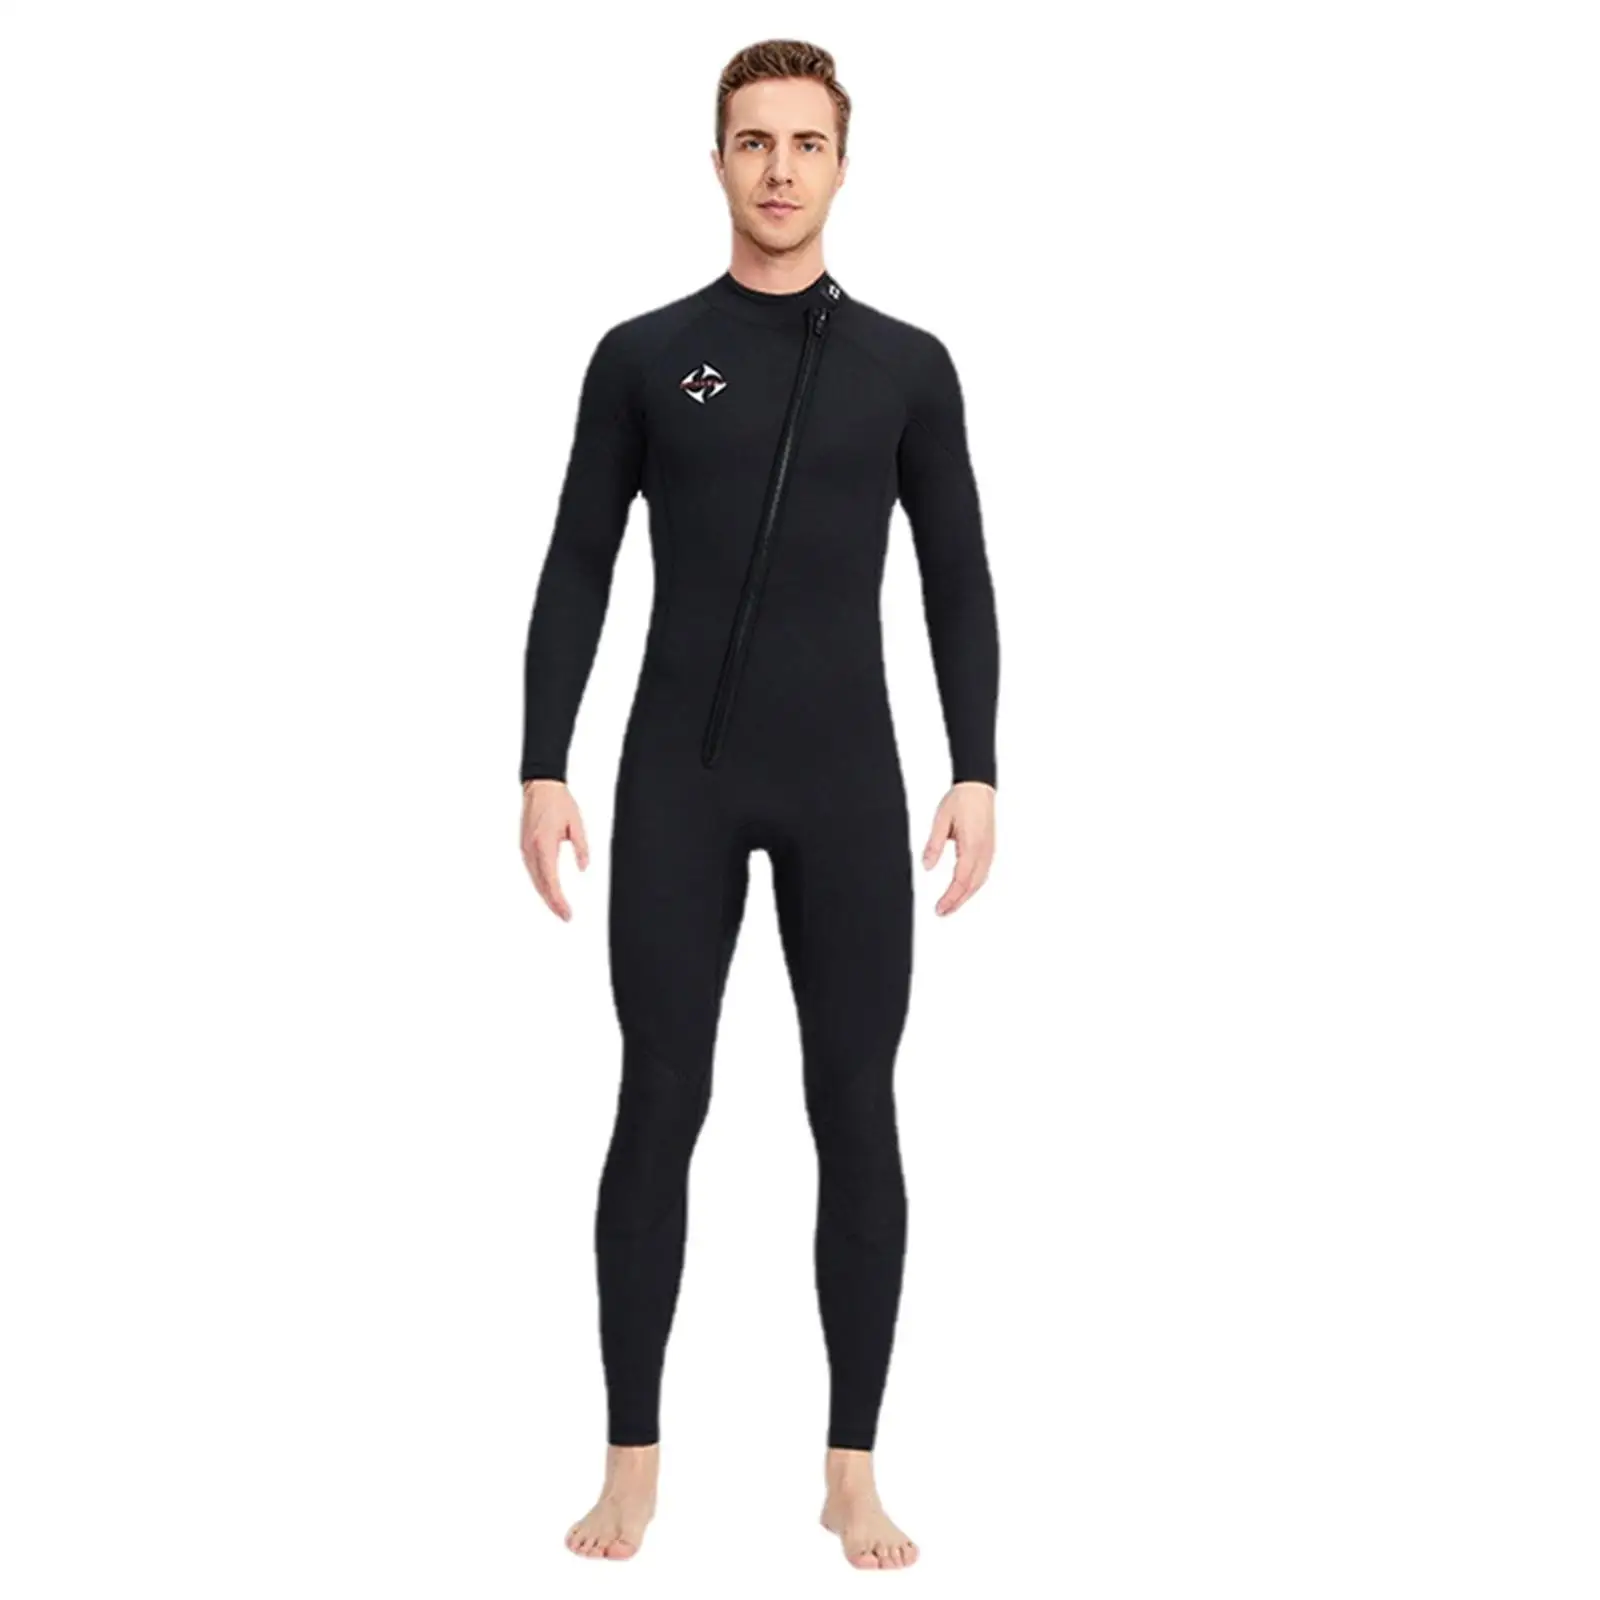 Wetsuits 3mm Neoprene Full Scuba Diving Suits Surfing Swimming Long Sleeve Keep  Zip  Stretchy for Water Sports